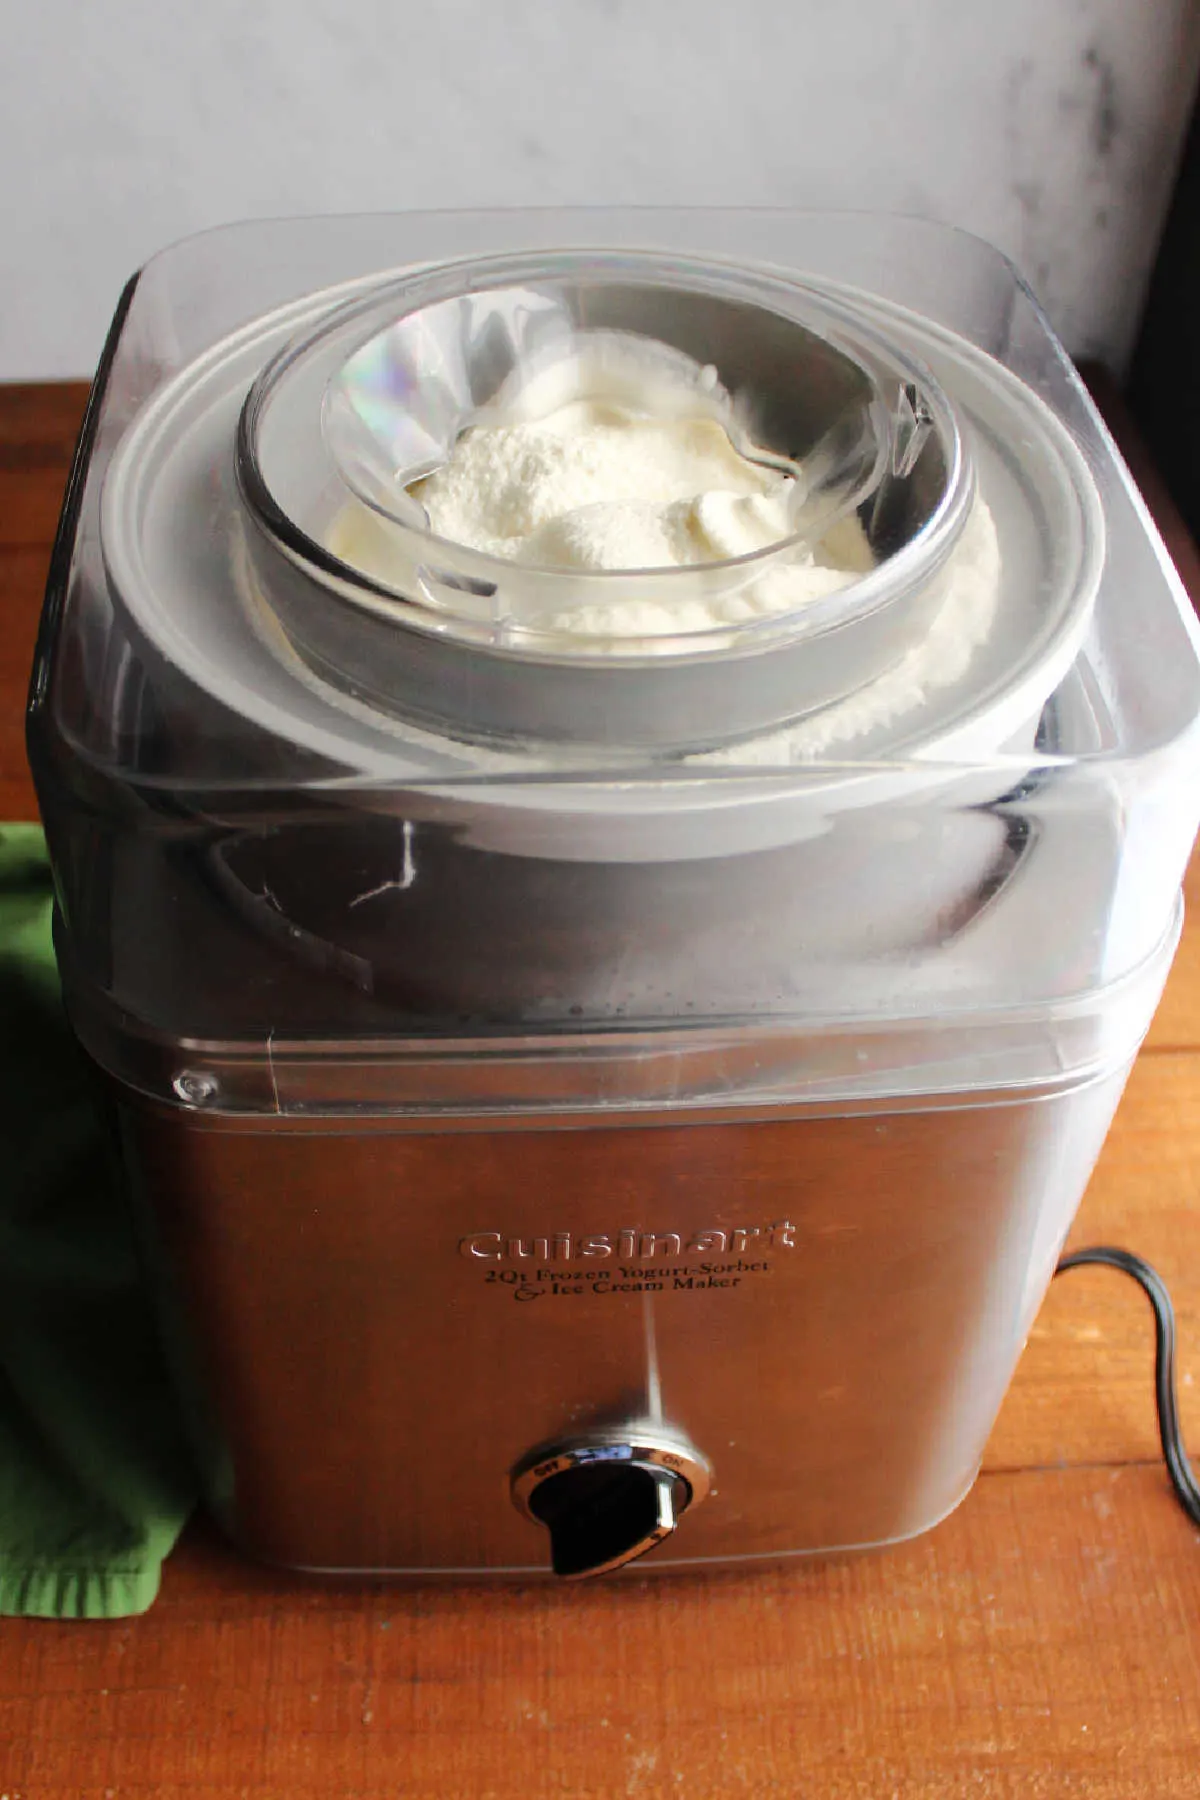 Churned key lime ice cream in ice cream maker, ready to be transferred to storage containers.